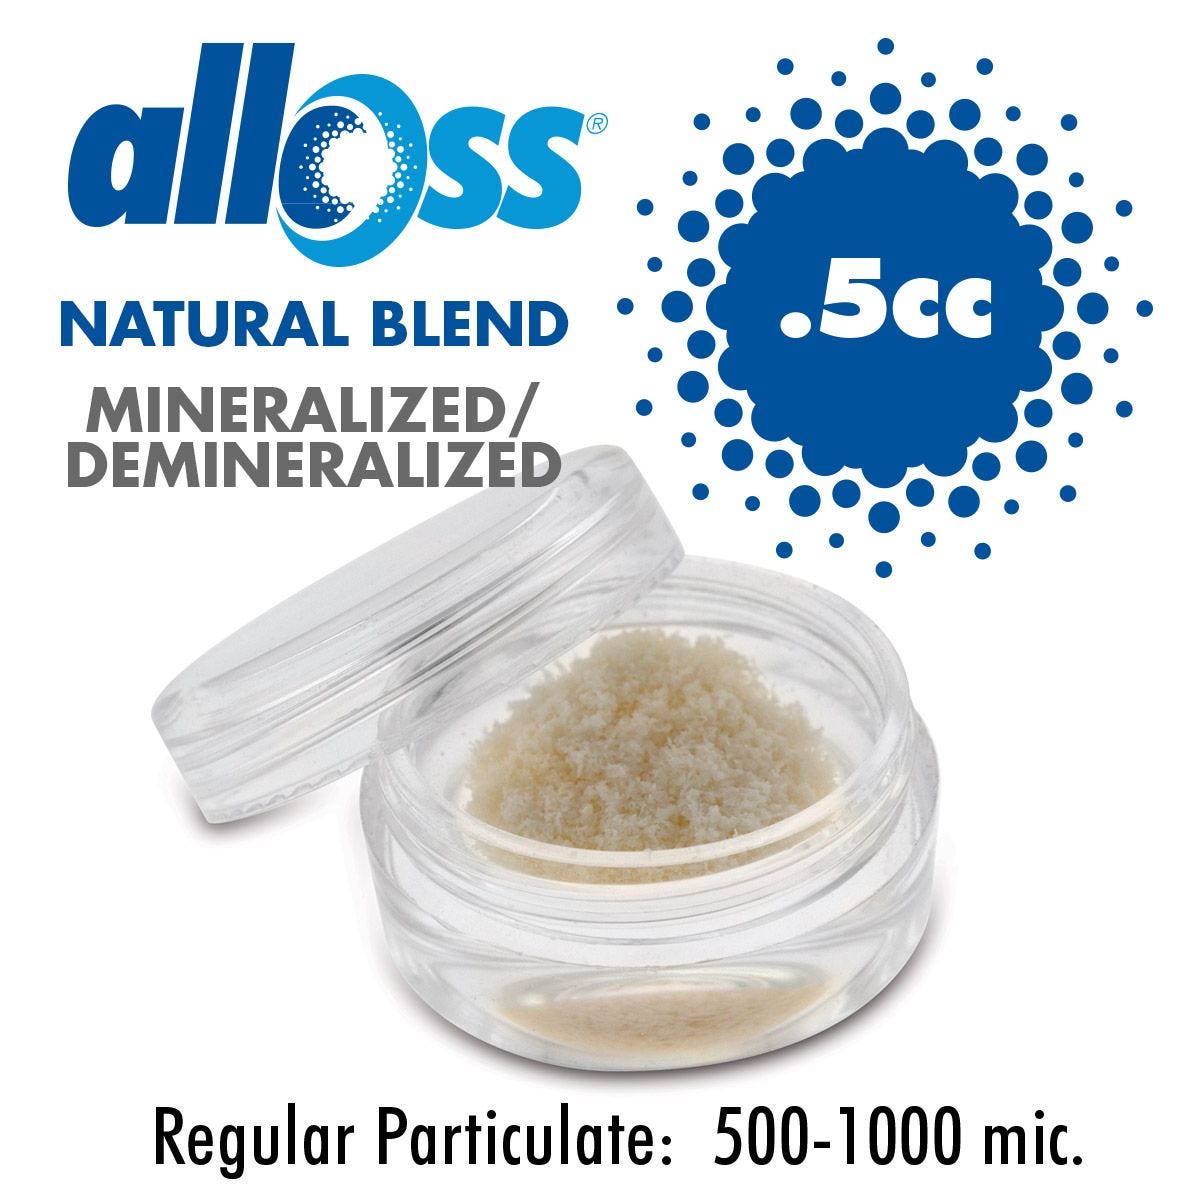 alloOss® Natural Blend Mineralized/Demineralized Particulate 500-1000um (0.5cc)